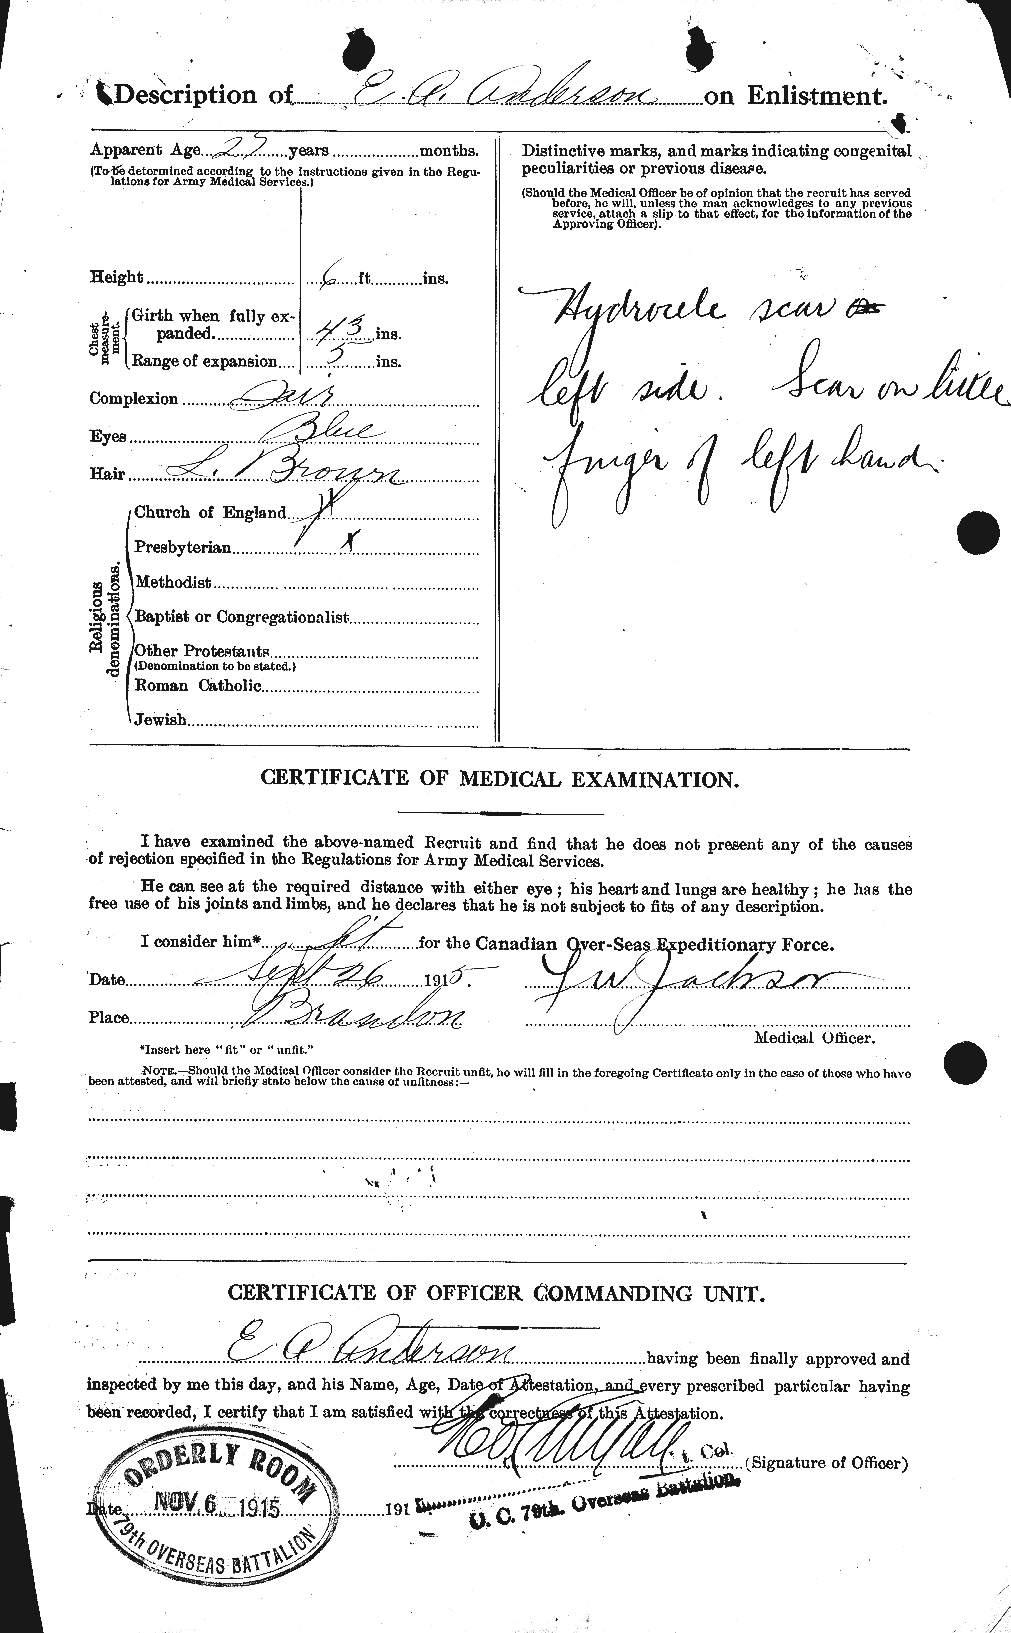 Personnel Records of the First World War - CEF 209948b